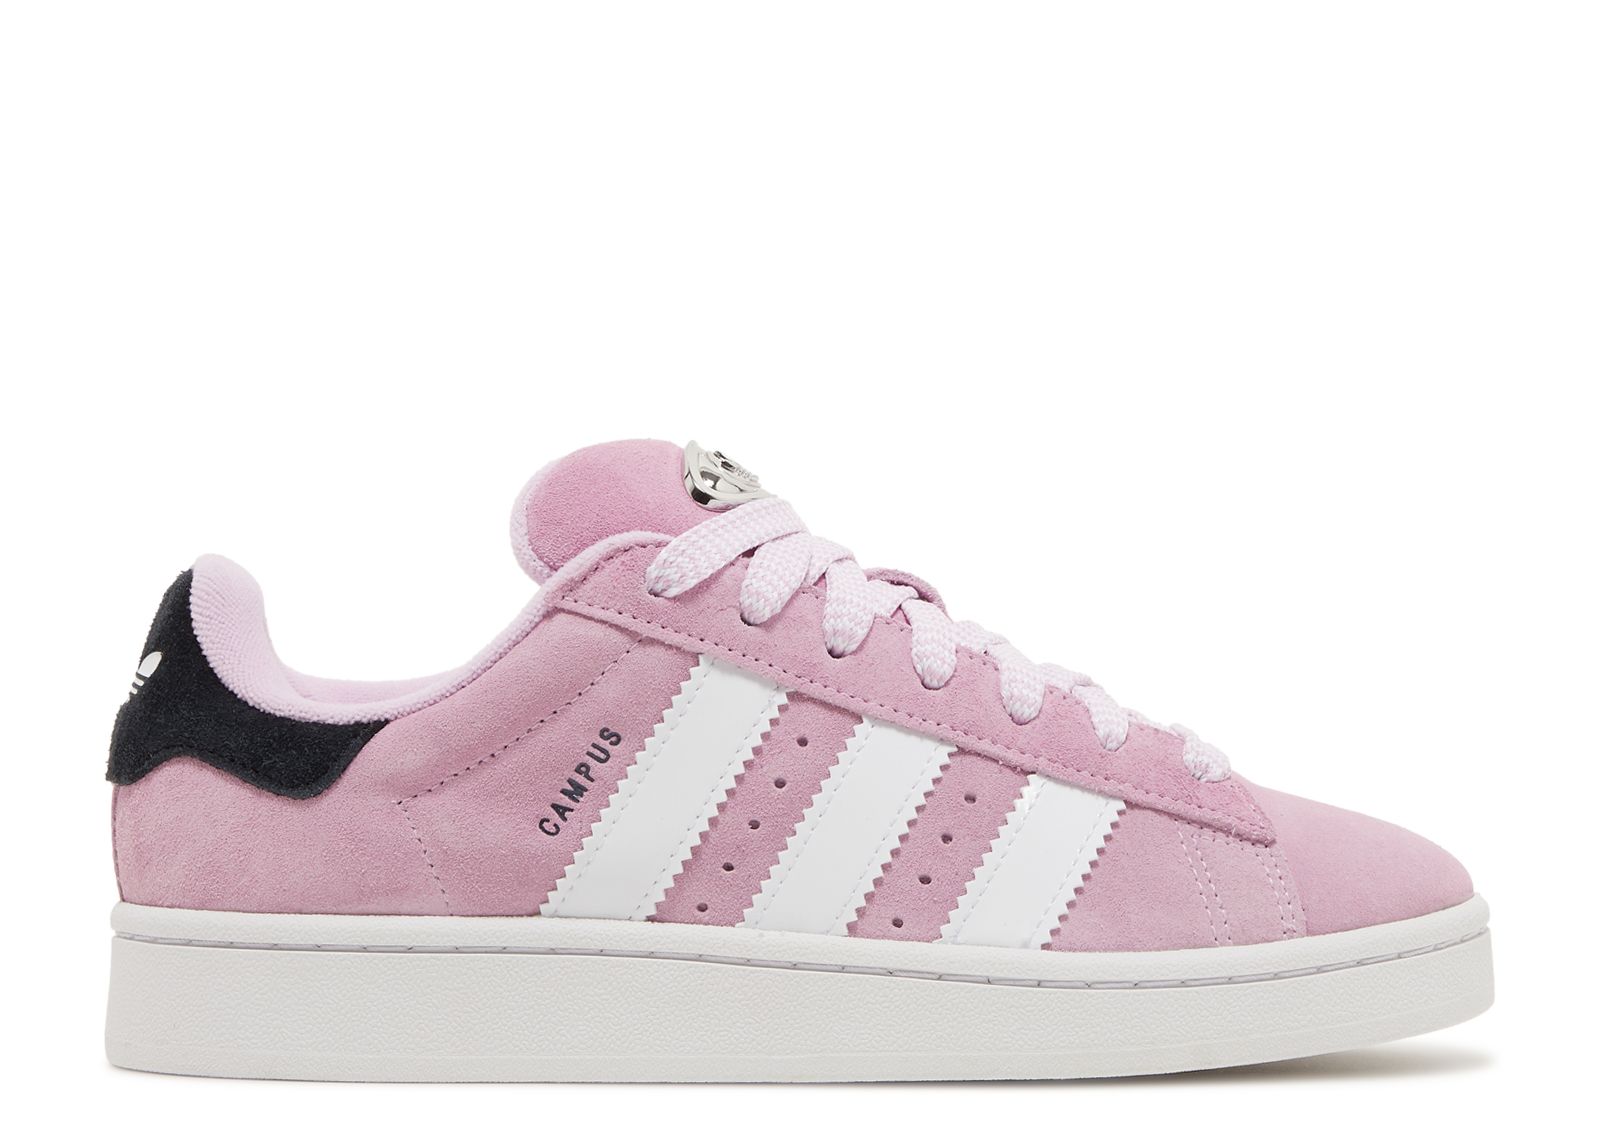 Wmns Campus 00s 'Bliss Lilac Black' - Adidas - HP6395 - bliss lilac ...